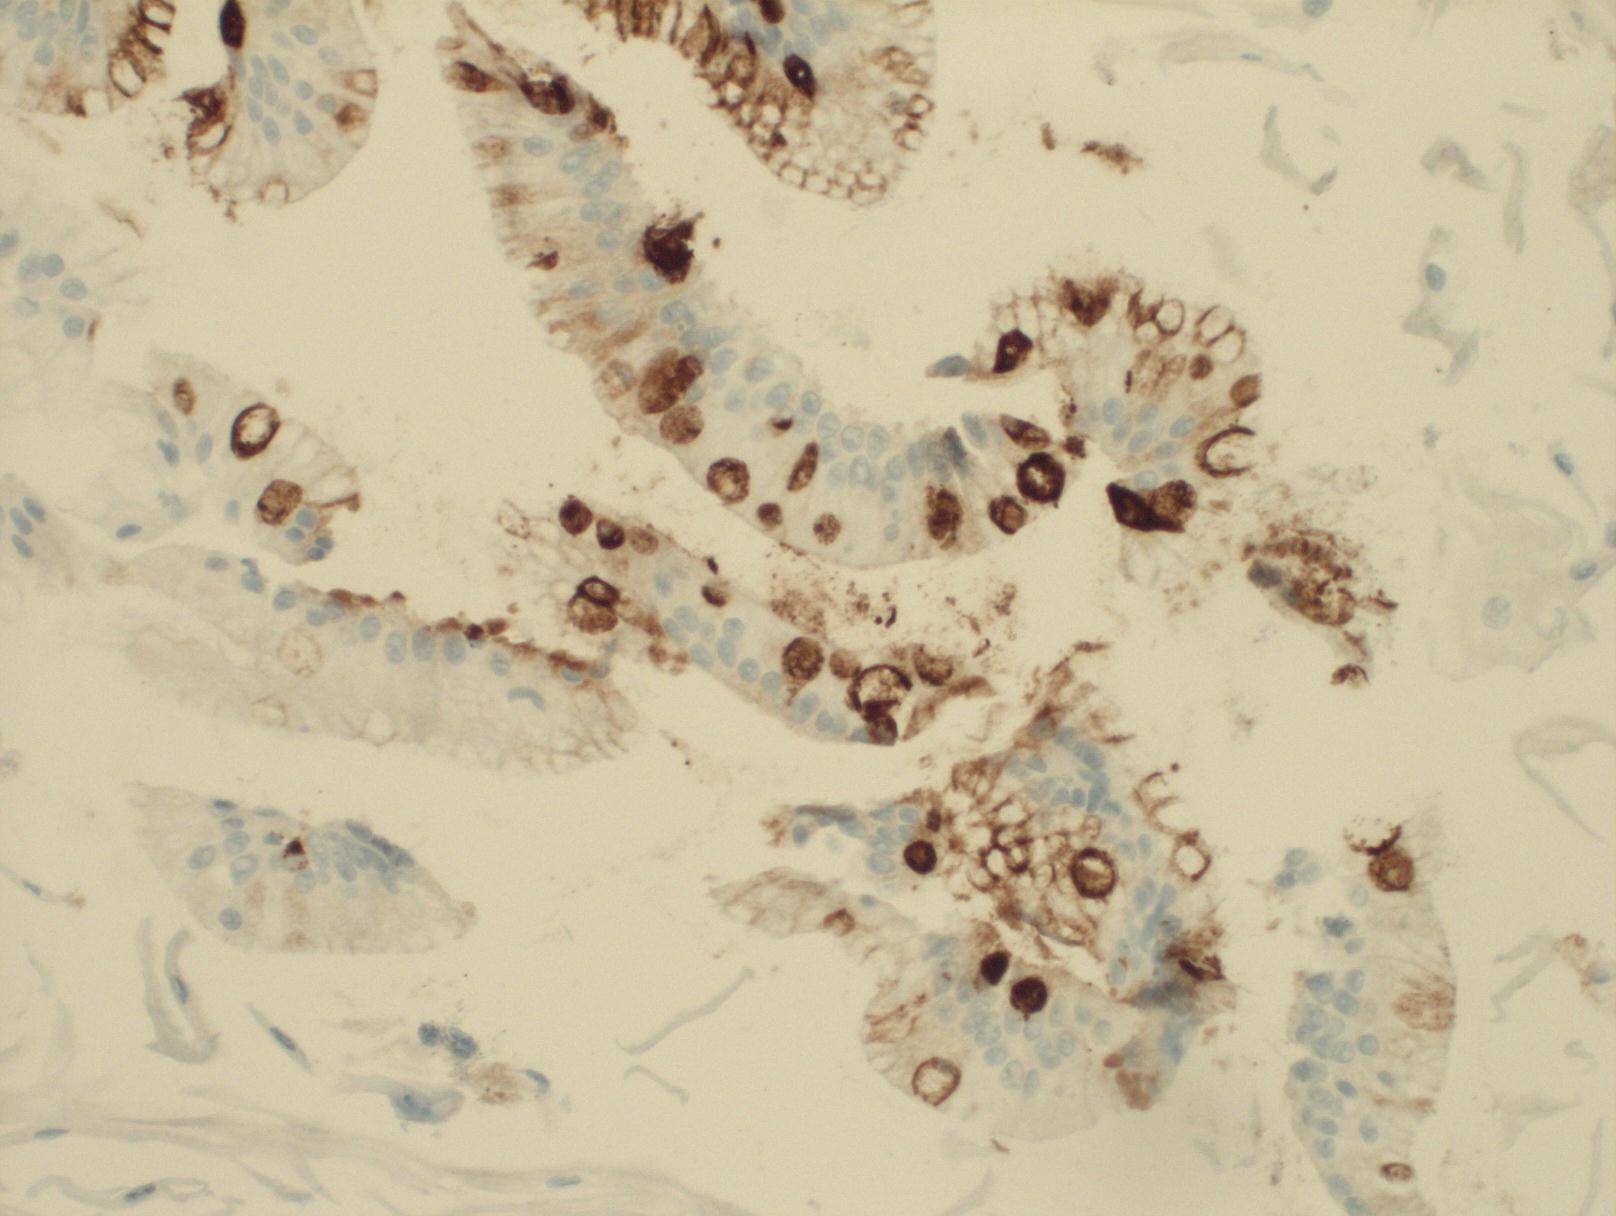 Cells from a Cytosponge sample - the brown areas indicate cells containing the TFF3 marker protein